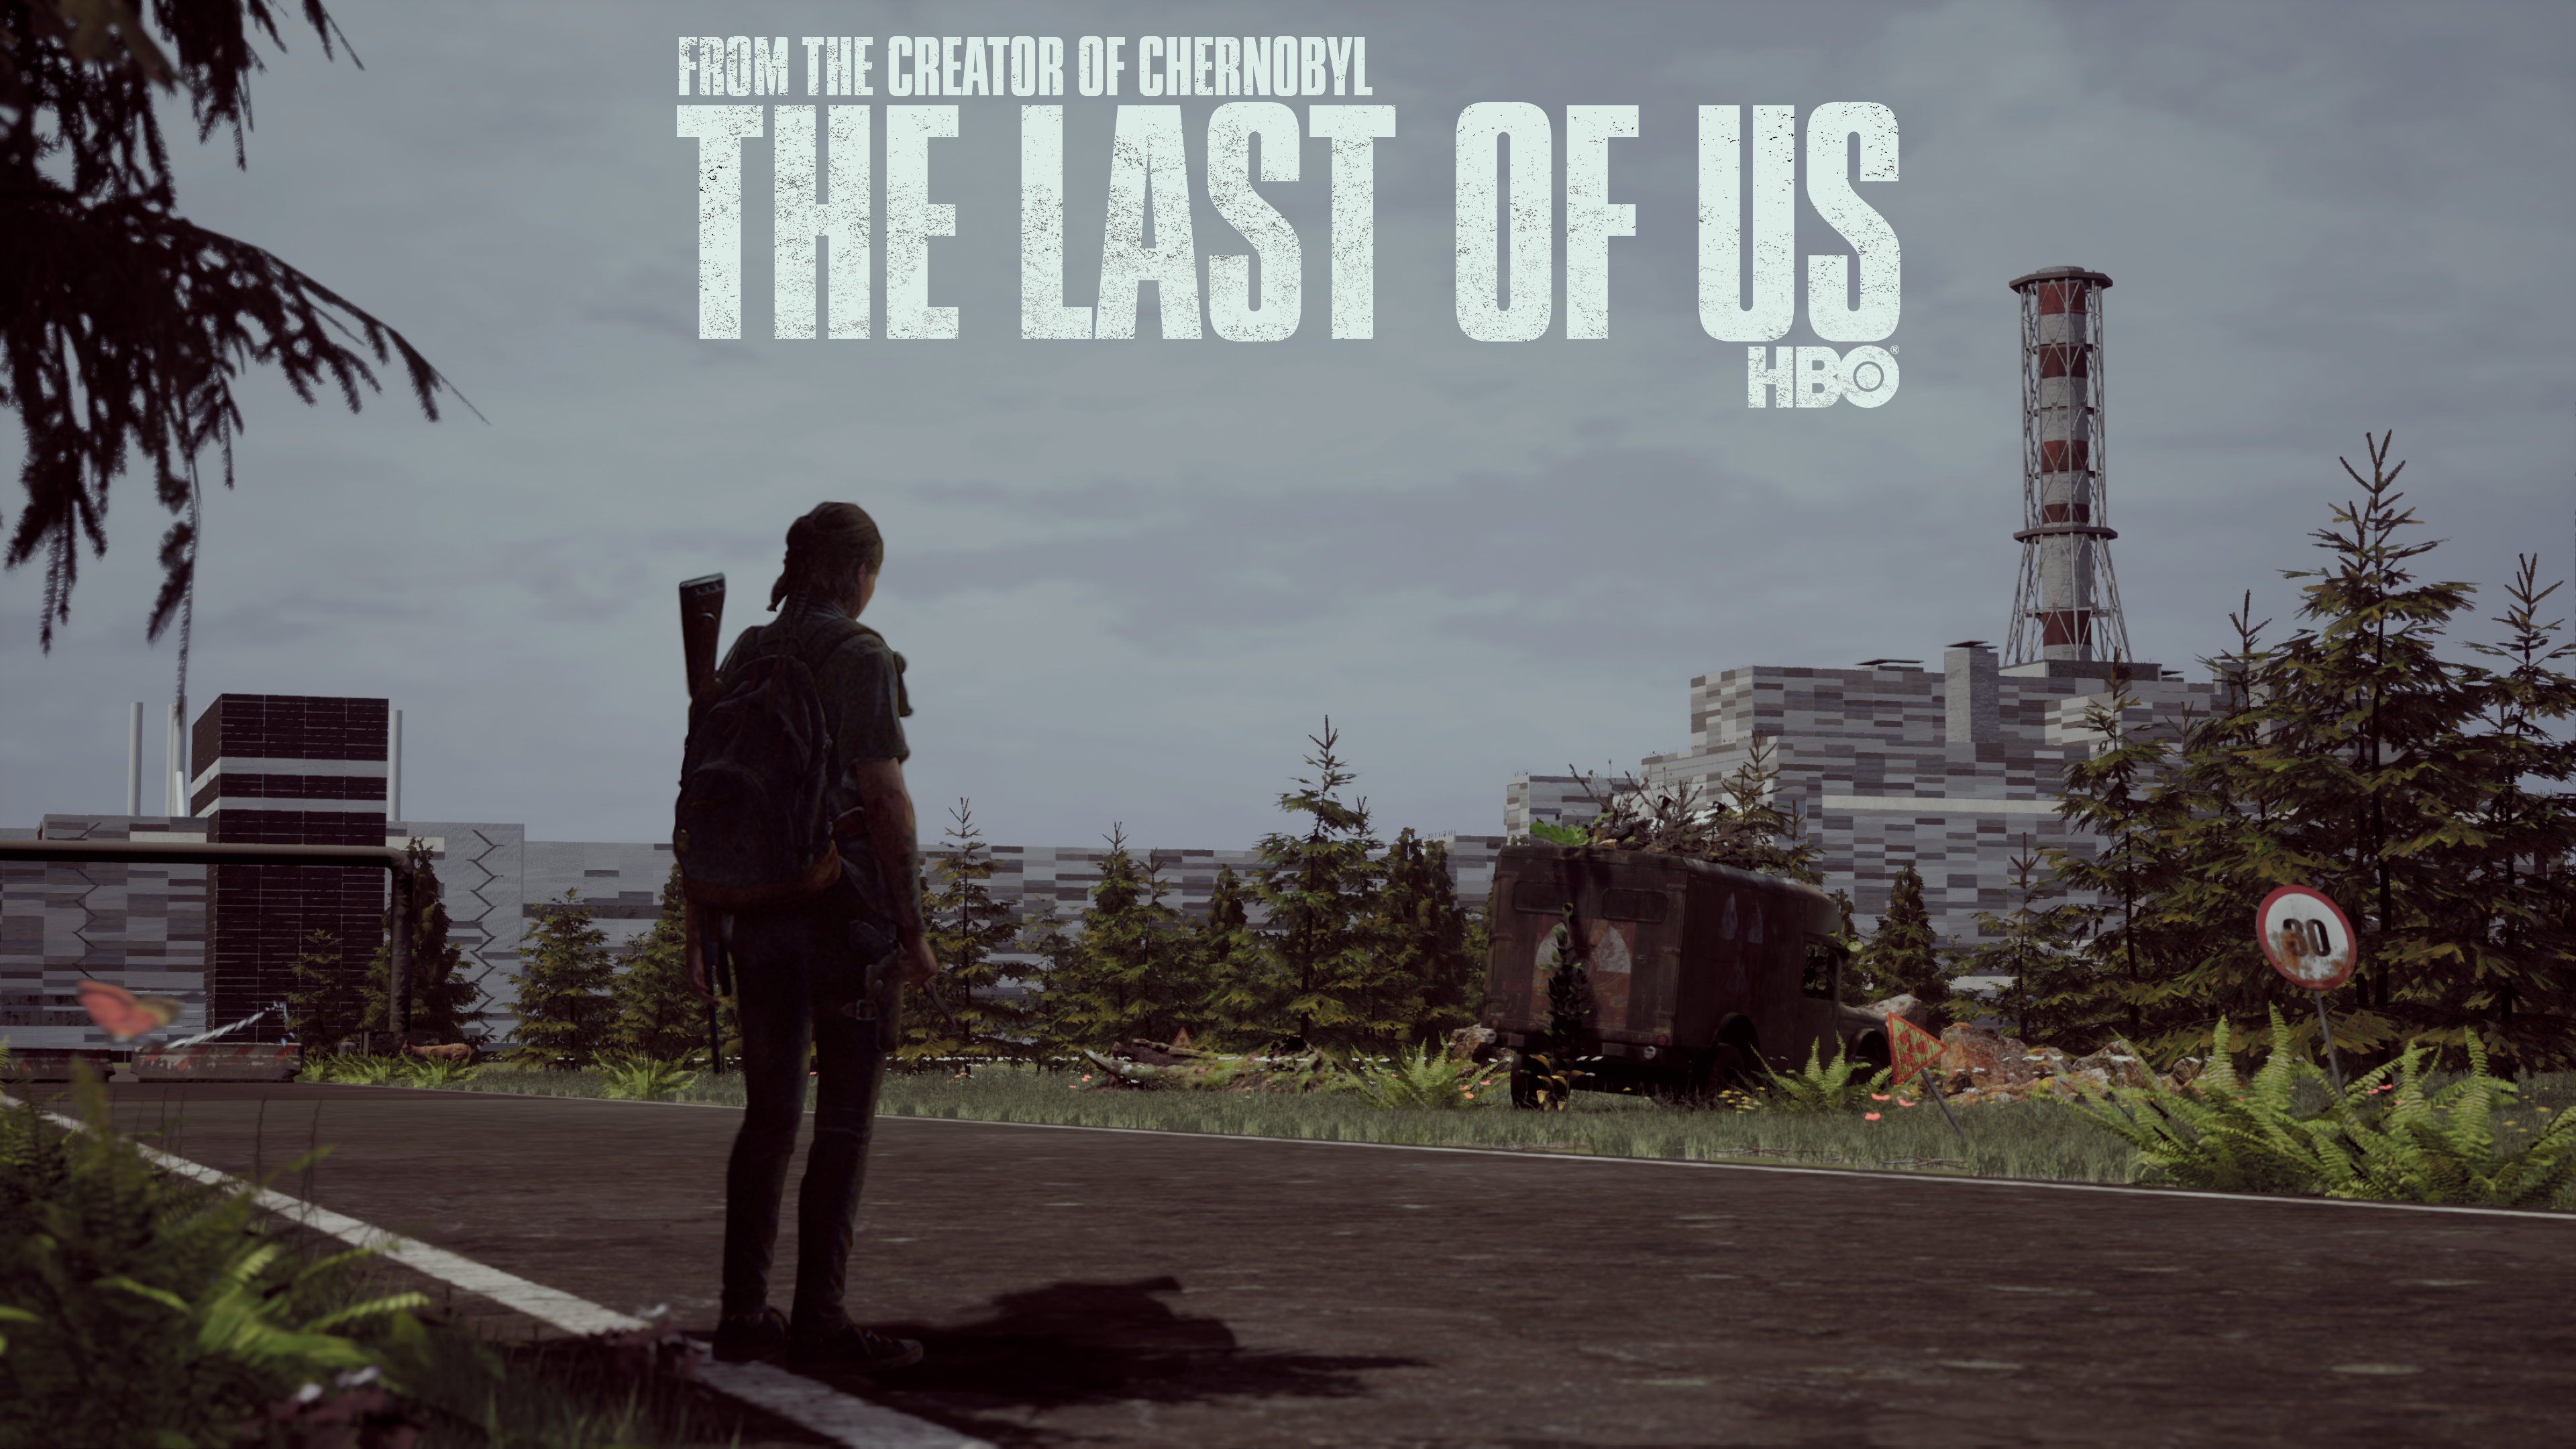 Wallpaper / The Last of Us, Chernobyl, Naughty Dog, HBO, PlayStation free download